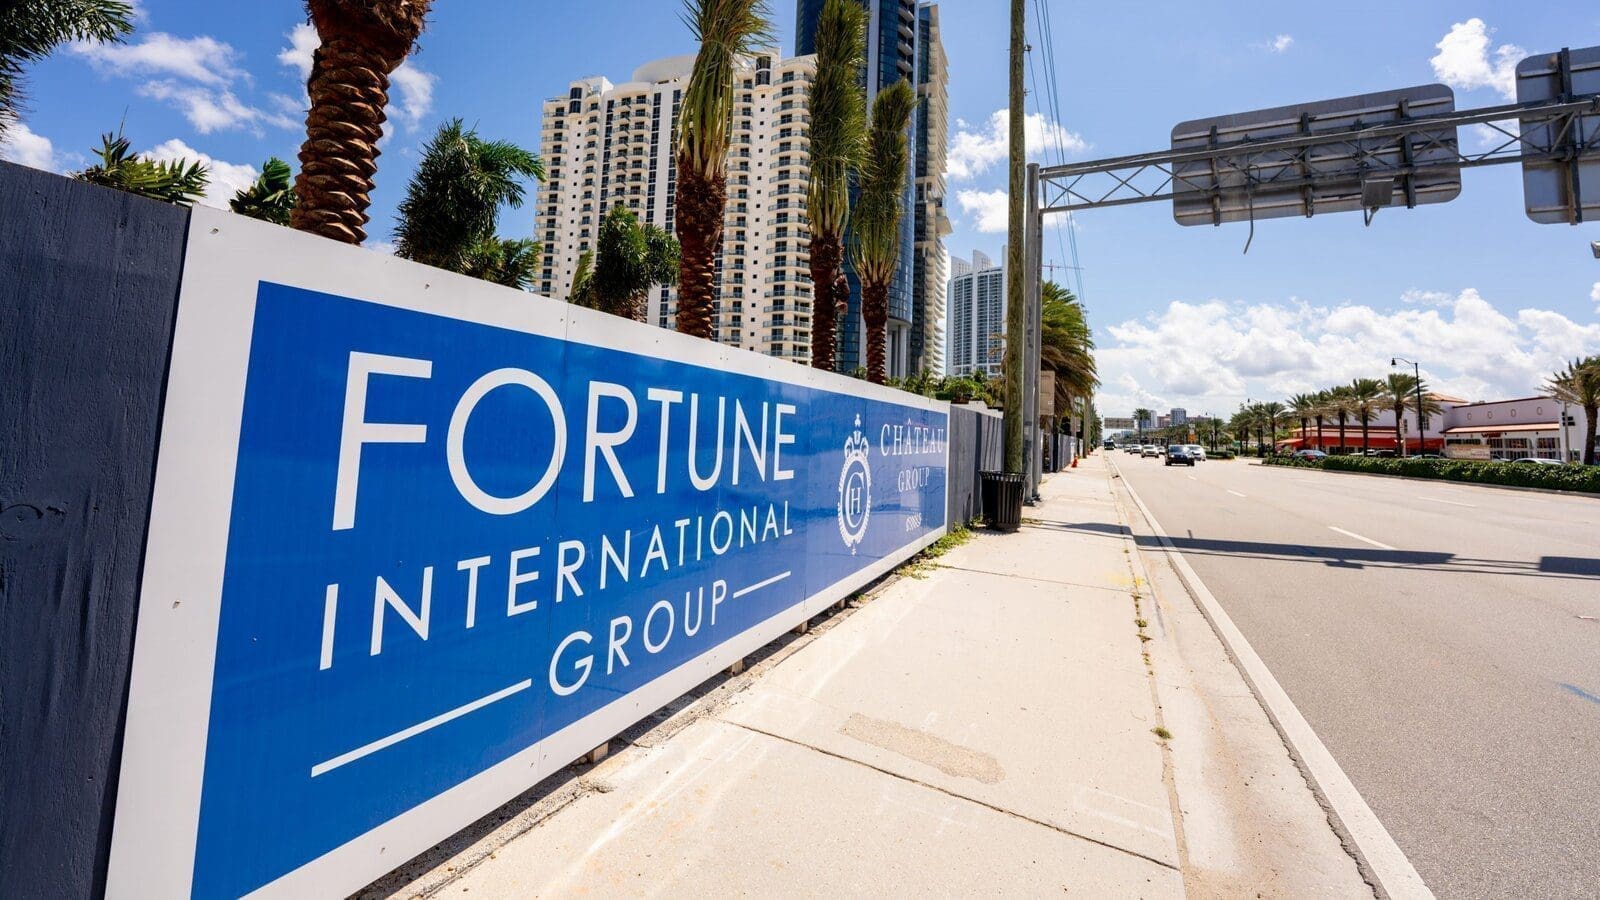 Fortune International mergers its import division due to redundancy